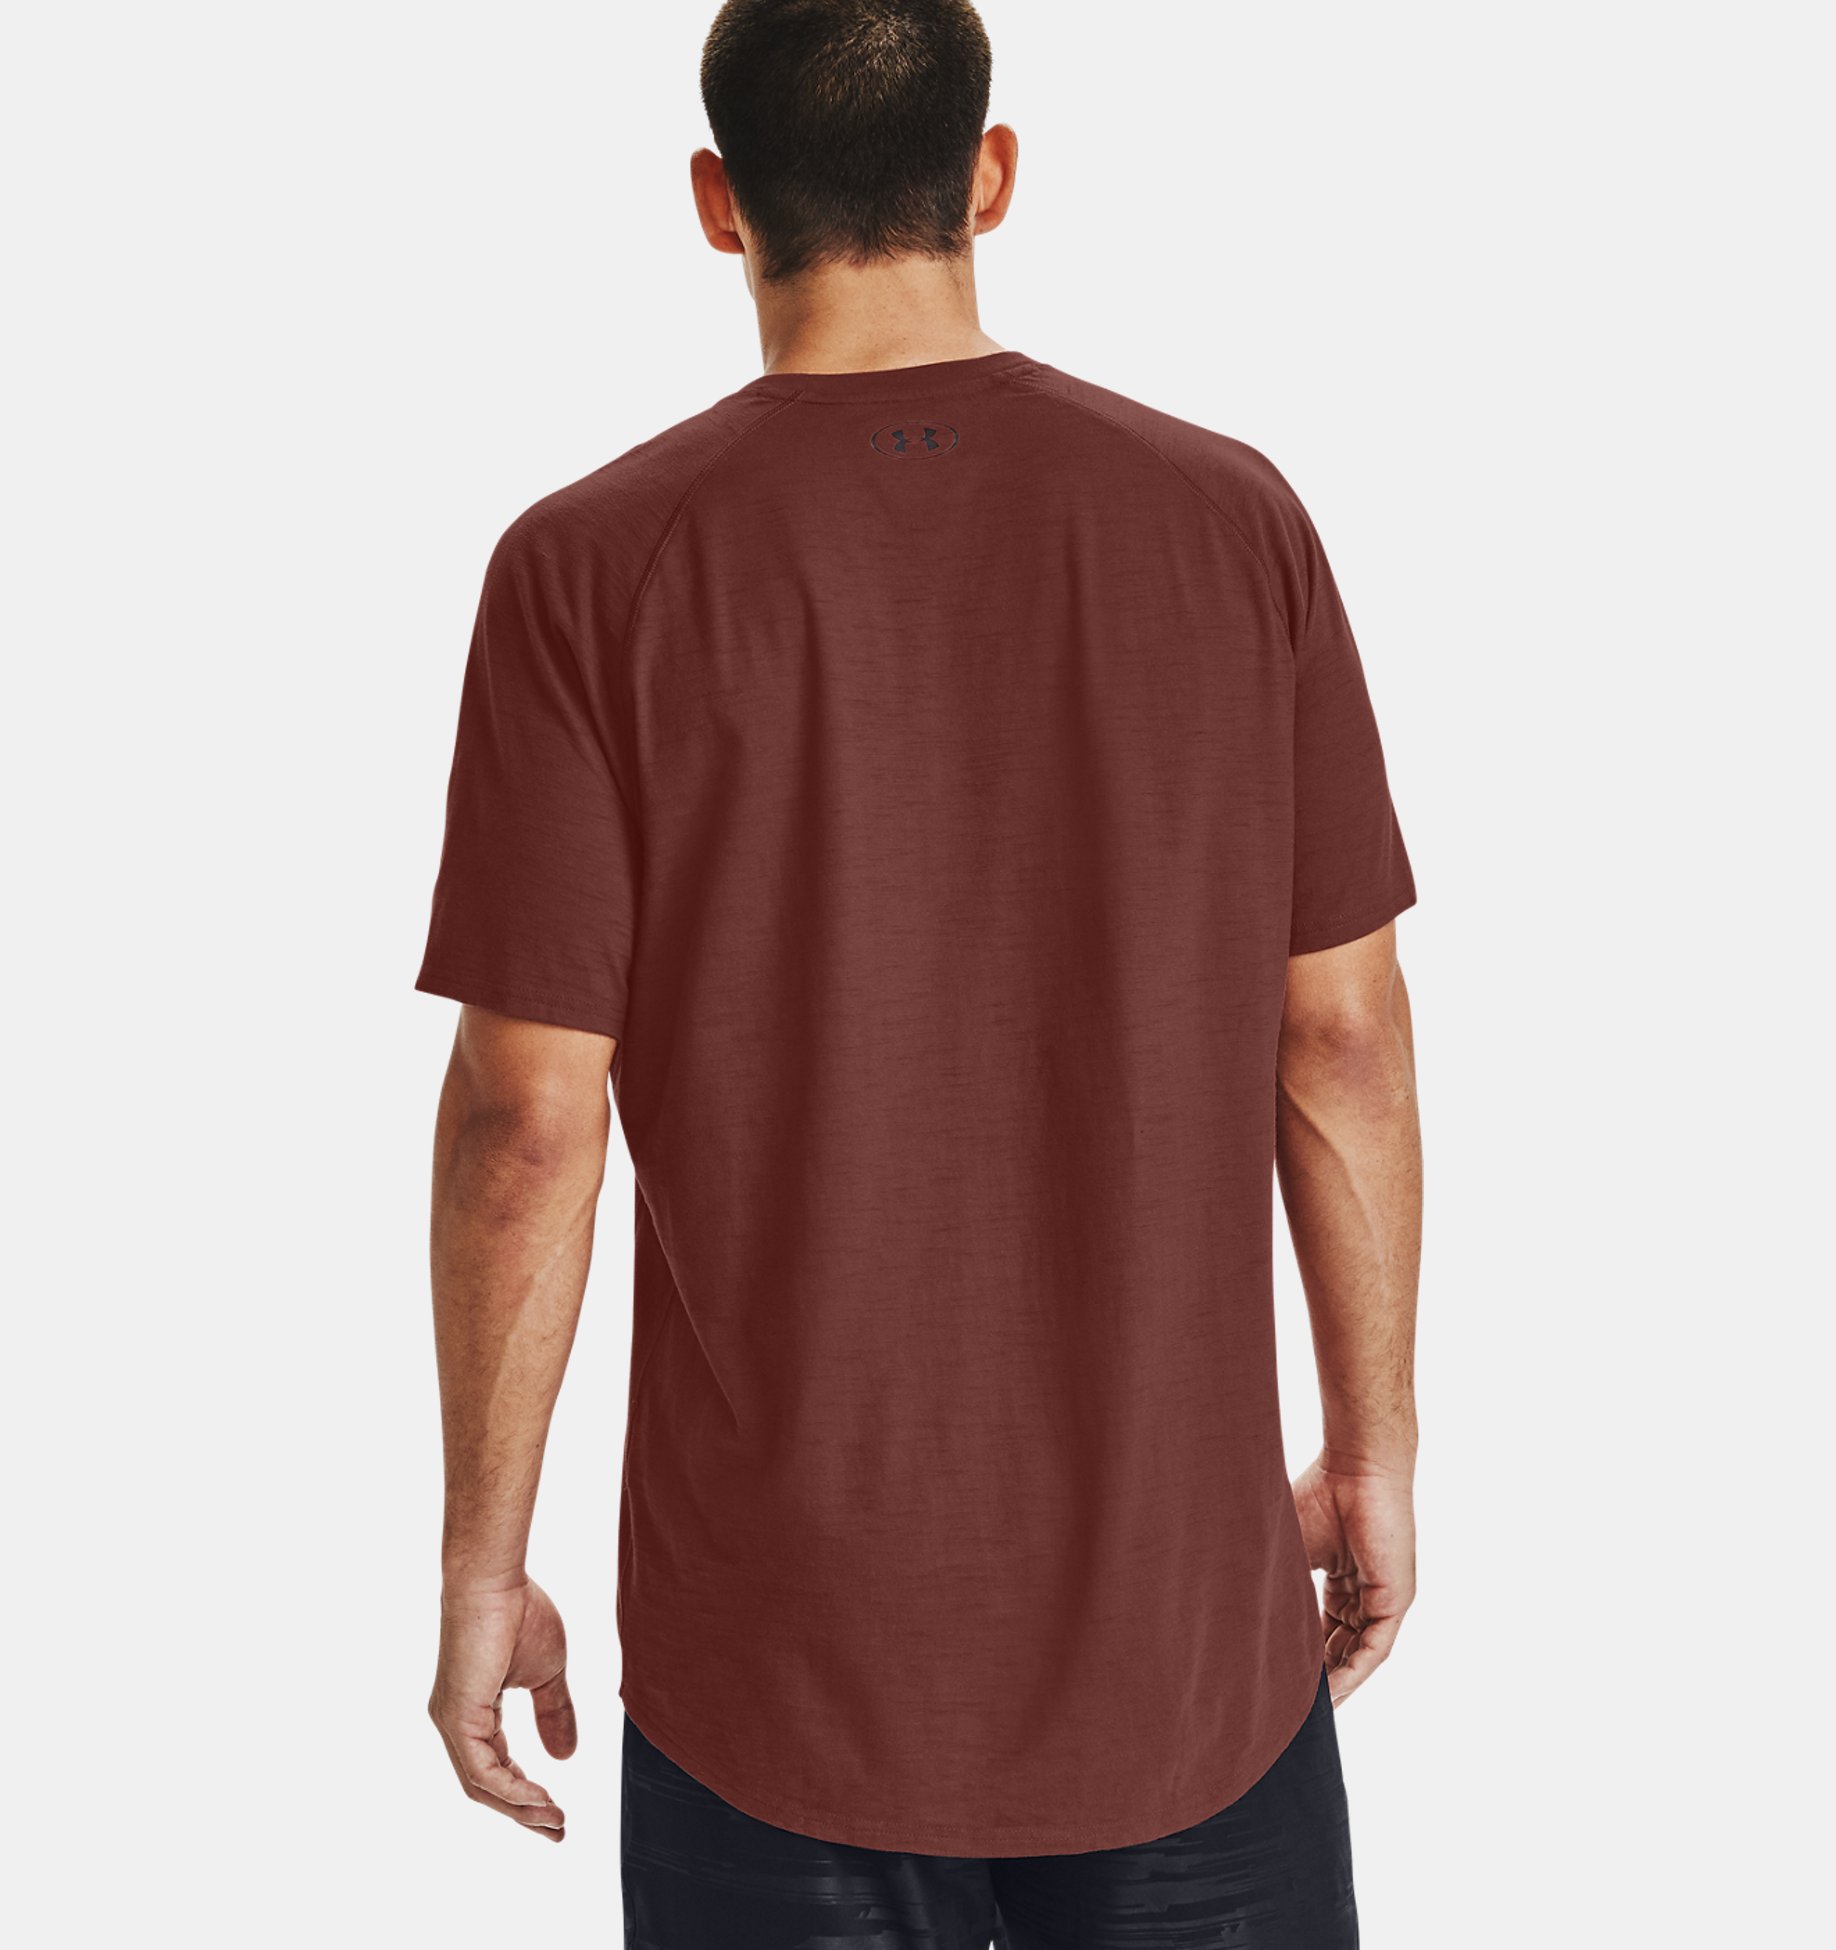 witch Expect it lid Men's Charged Cotton® Short Sleeve | Under Armour